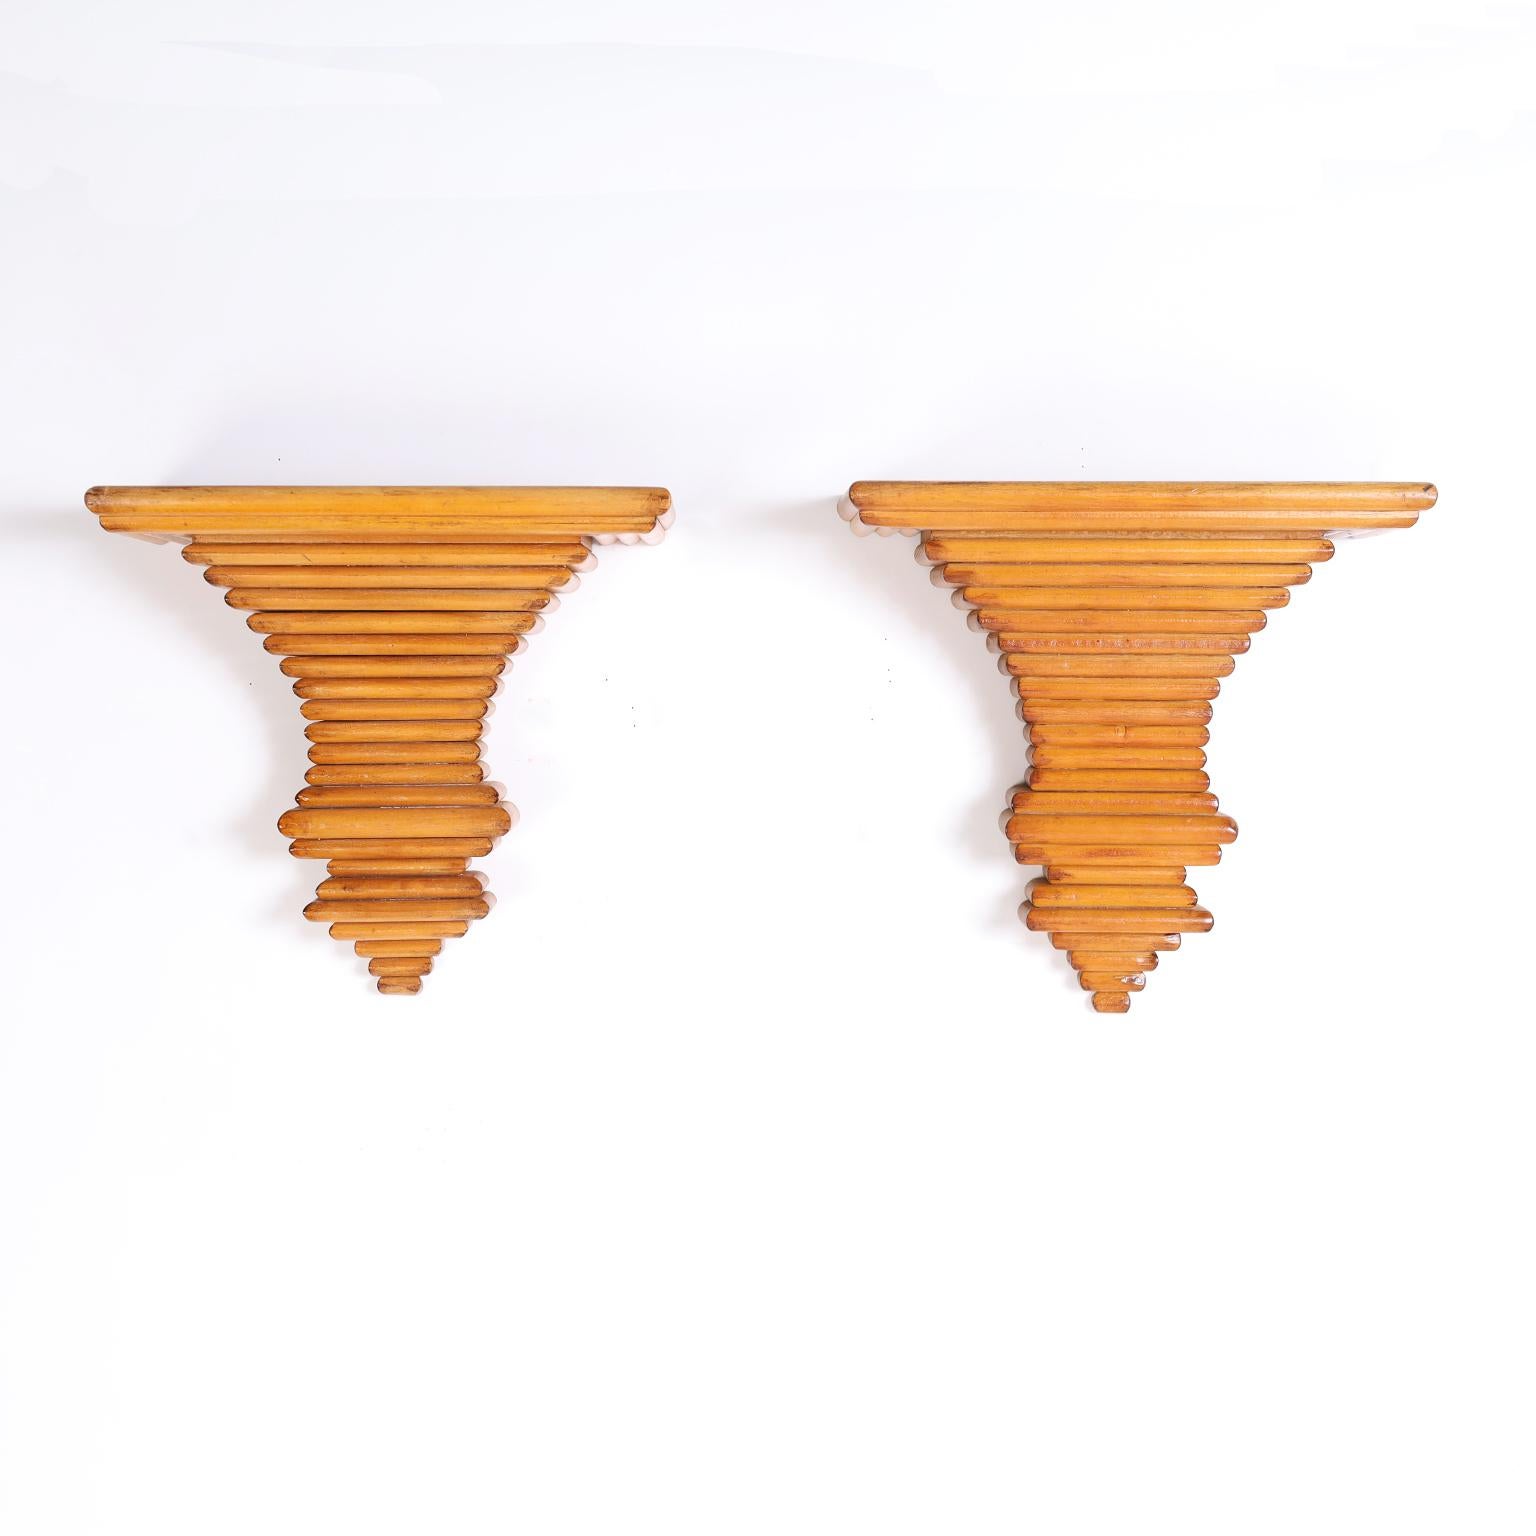 Italian wall brackets crafted in hardwood layered in an architecturally interesting form. Signed Made in Italy on the back.